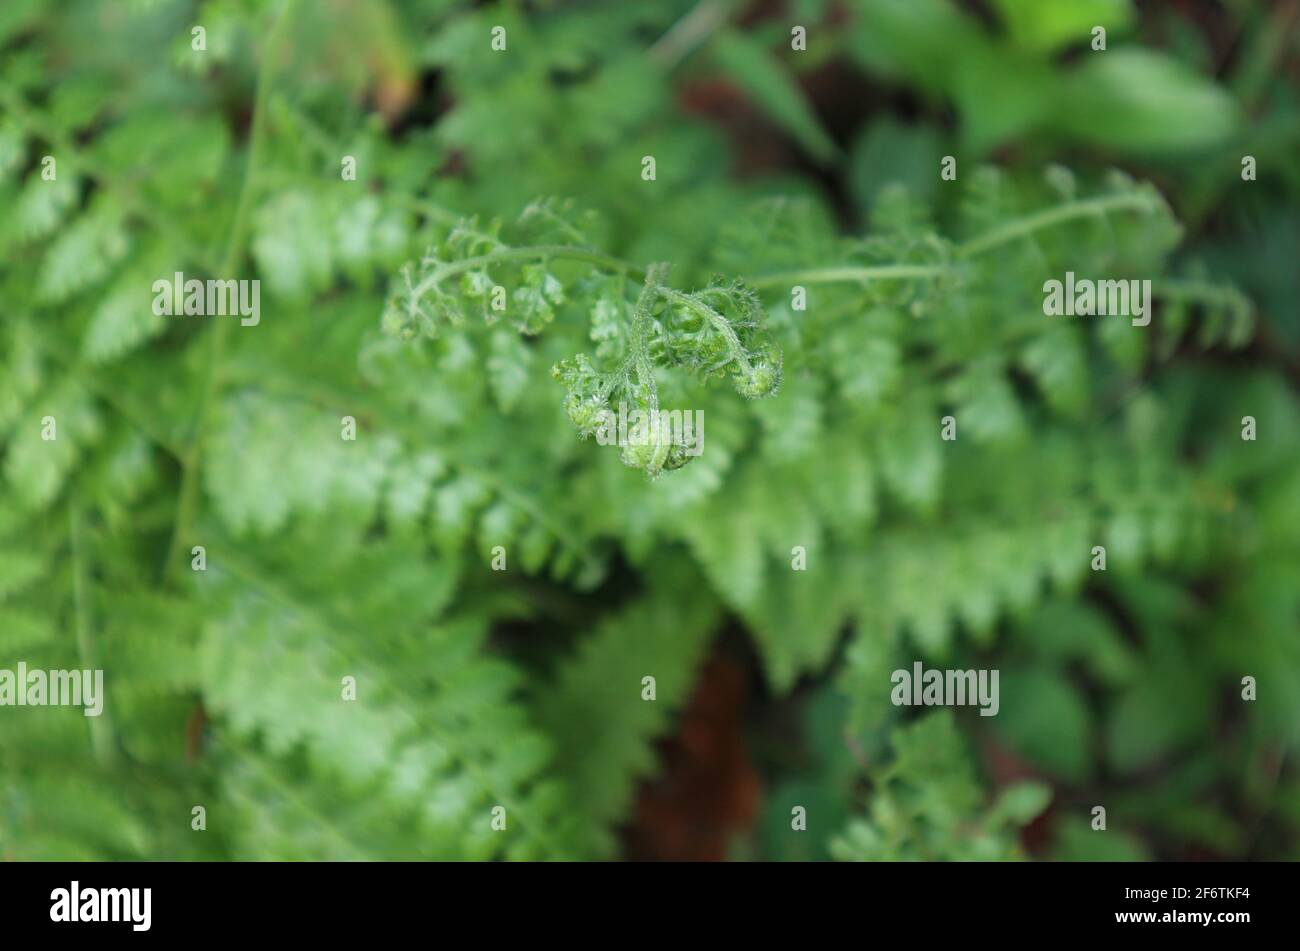 Extreme close up view of a bracken leaf's hairy tip Stock Photo